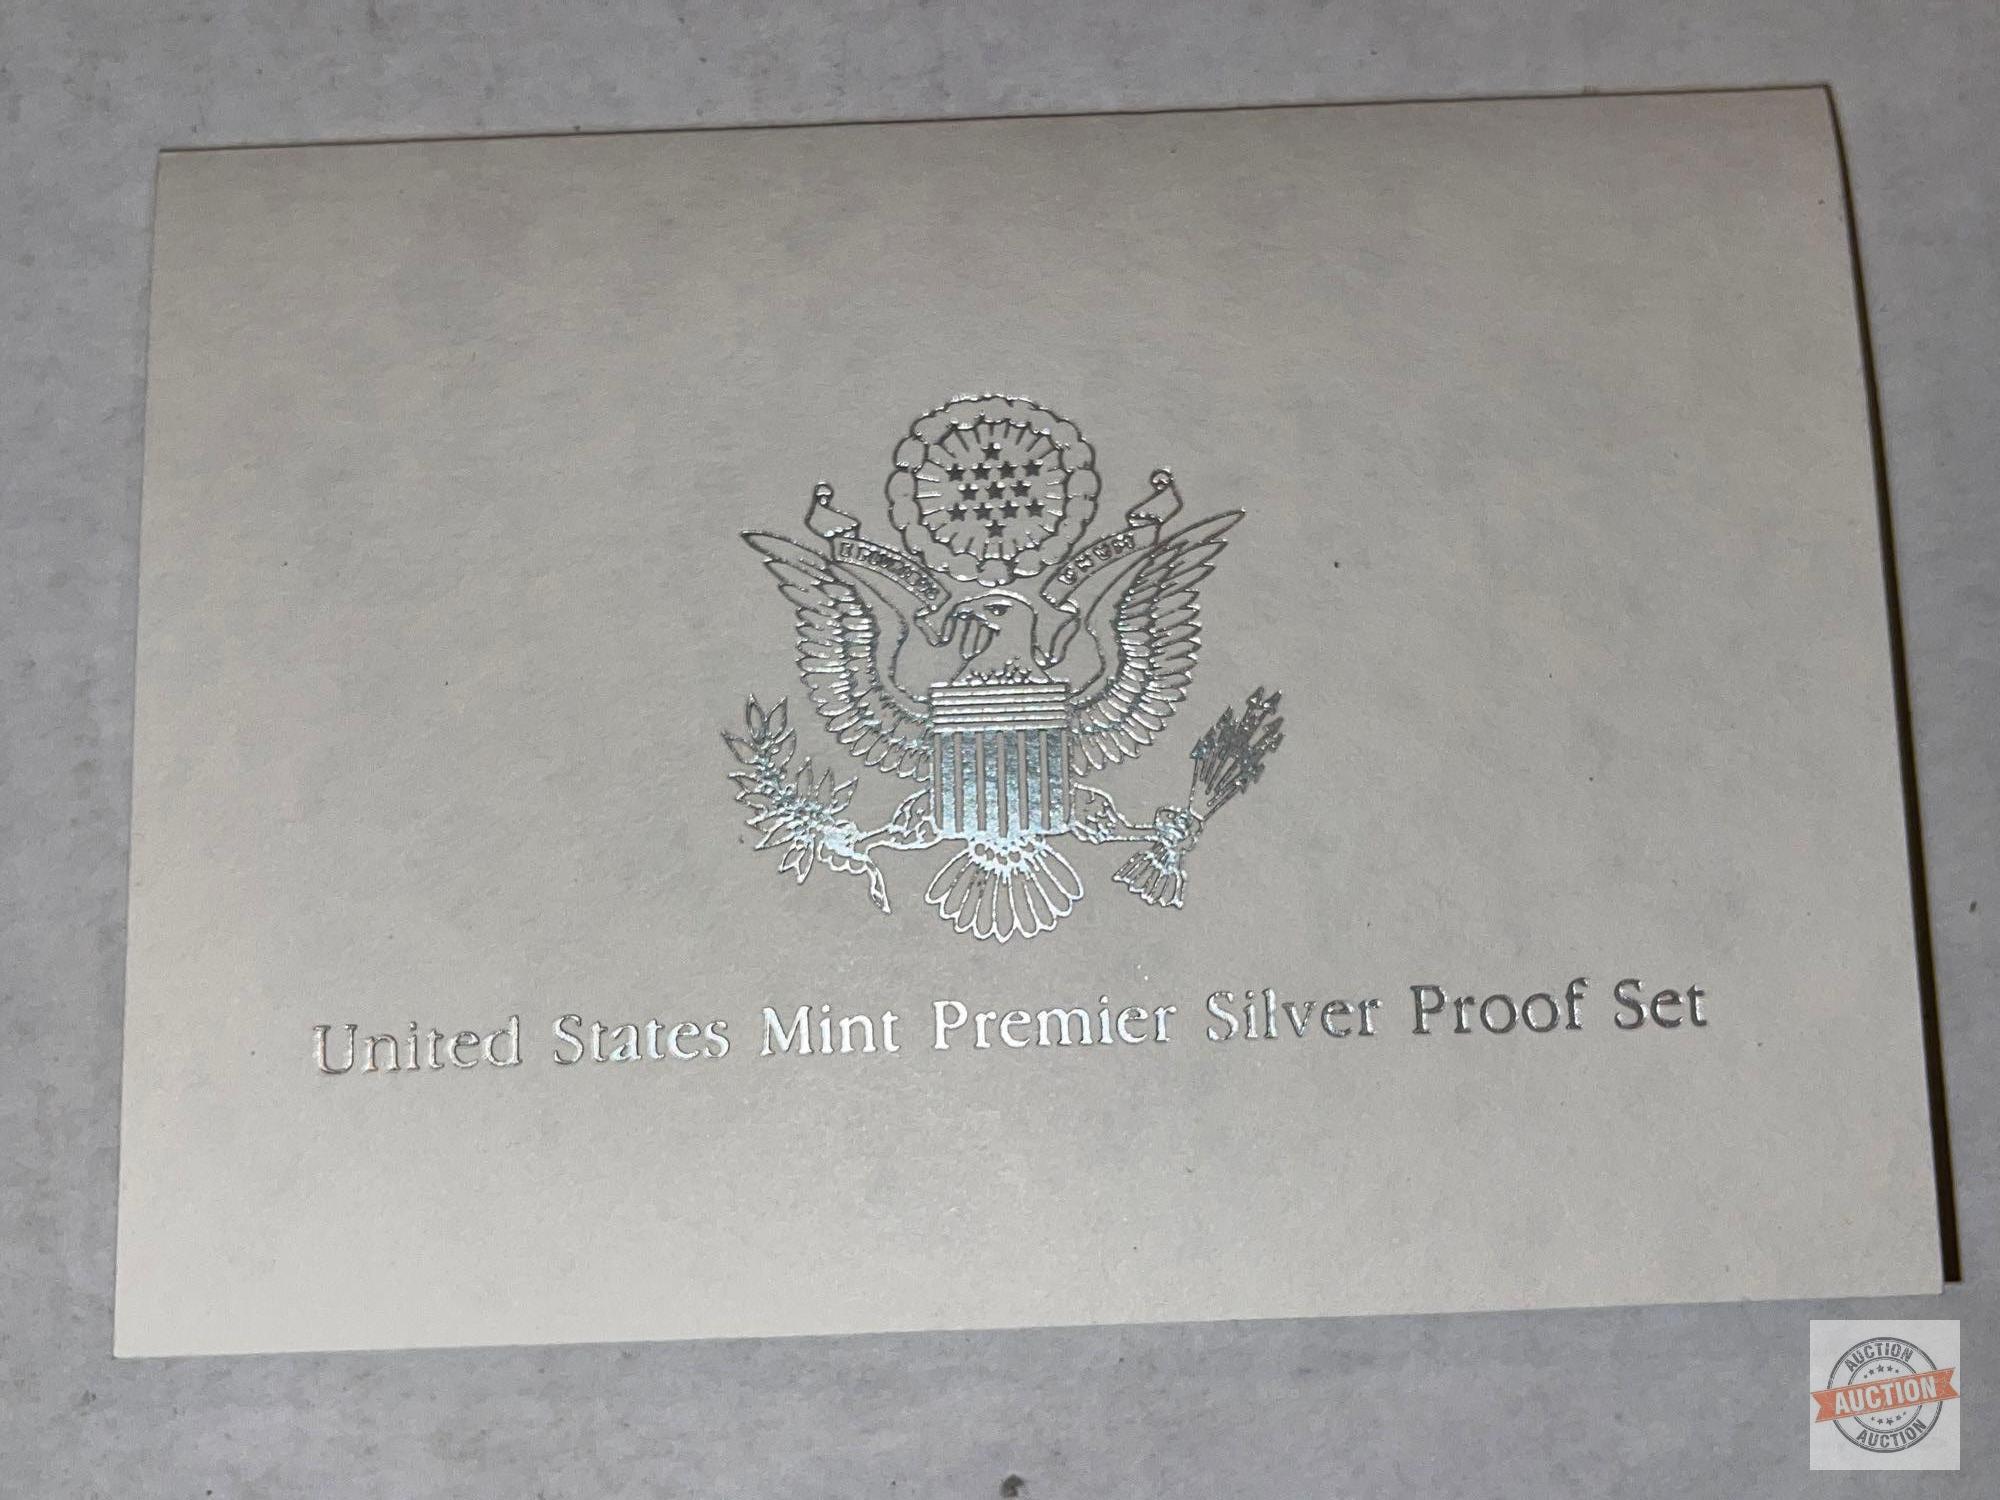 Silver - 1994s US Mint Premier Silver Proof Set Uncirculated